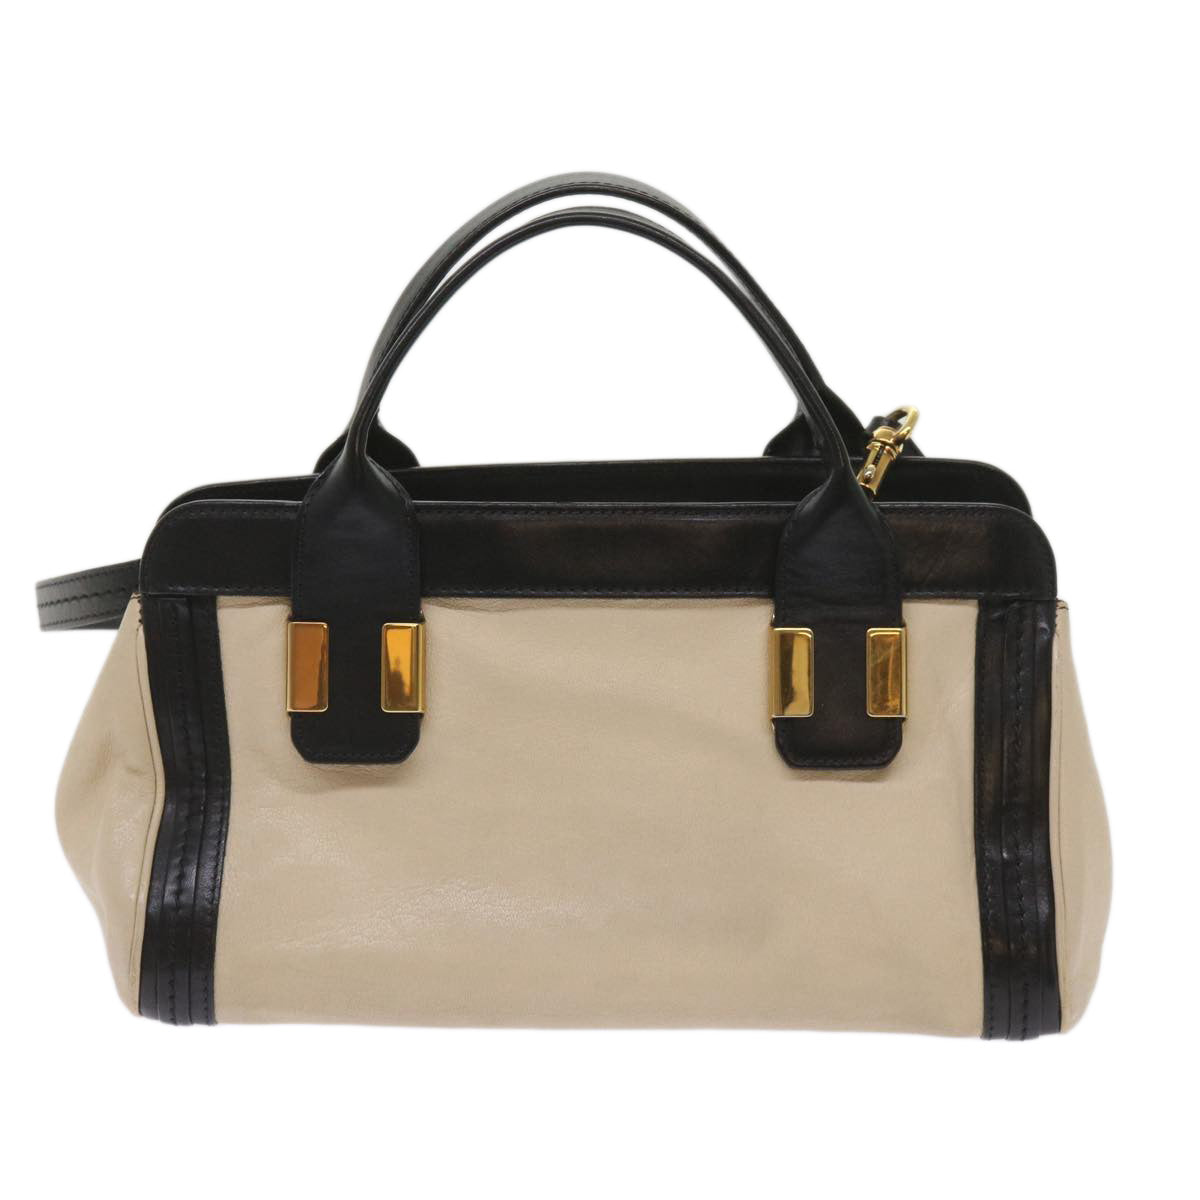 Chloe Alice Hand Bag Leather 2way Beige 04 14 63 65 Auth bs11871 - 0